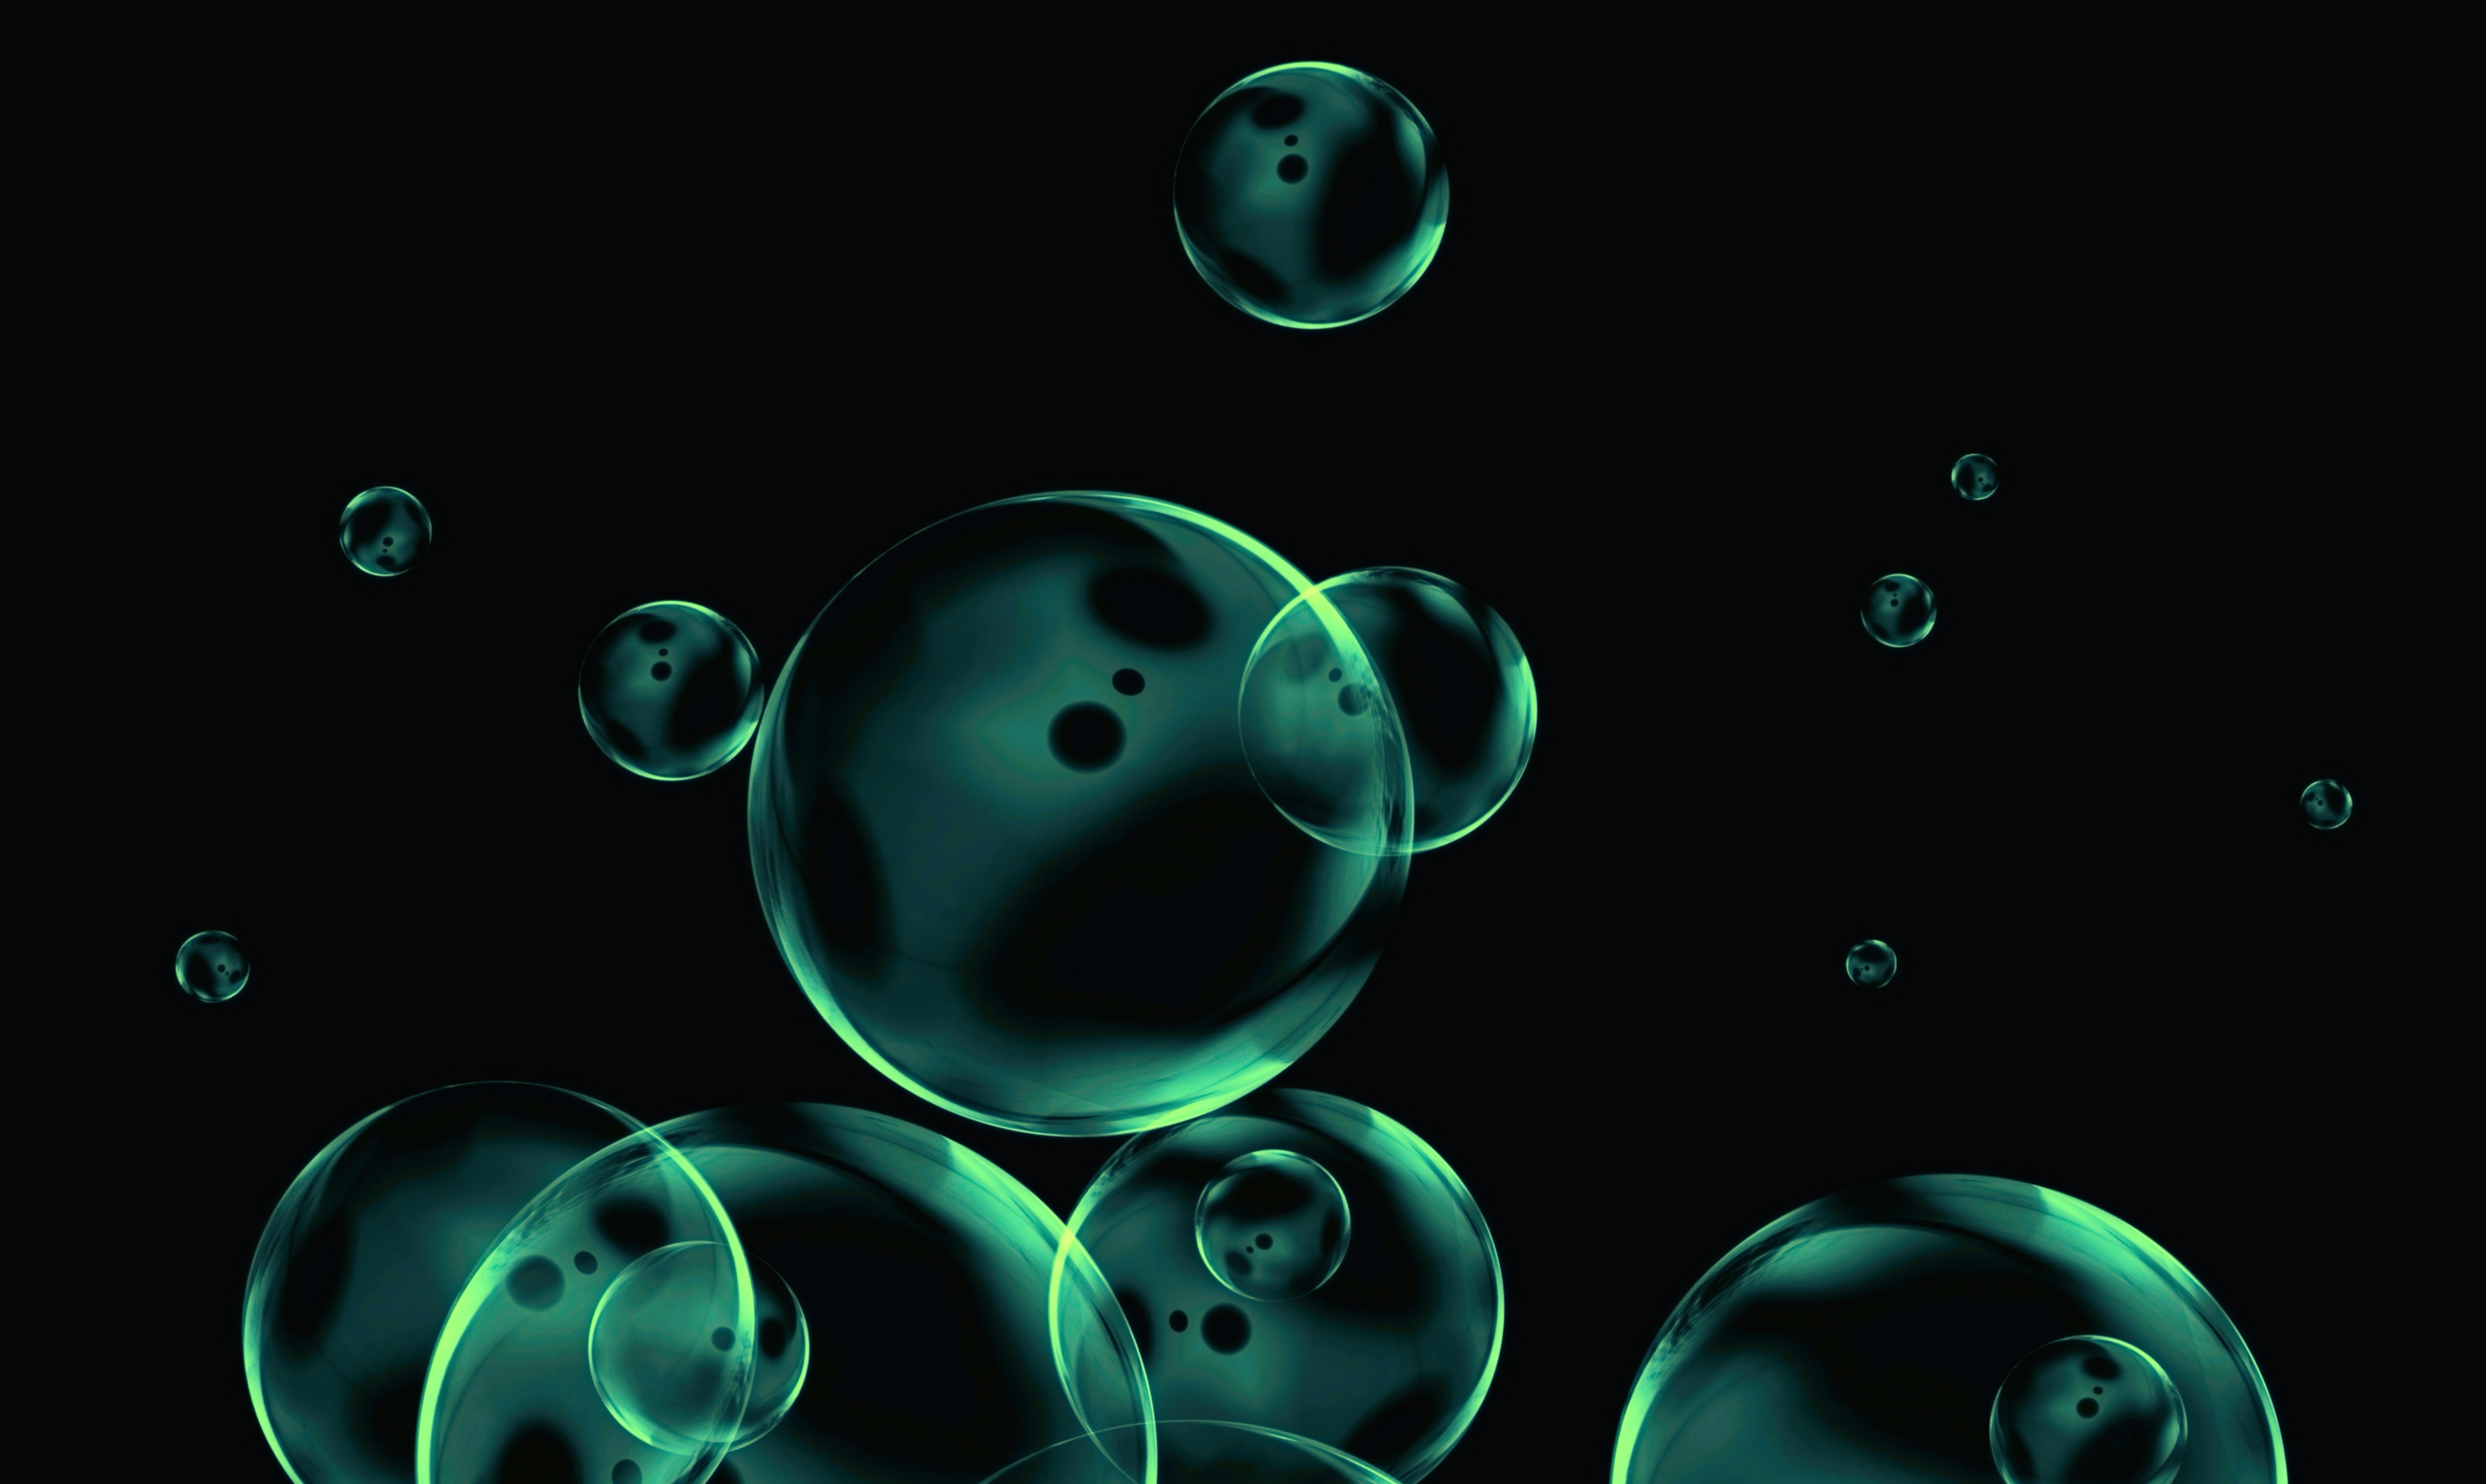 round, transparent, bubbles, dark background, abstract High Definition image